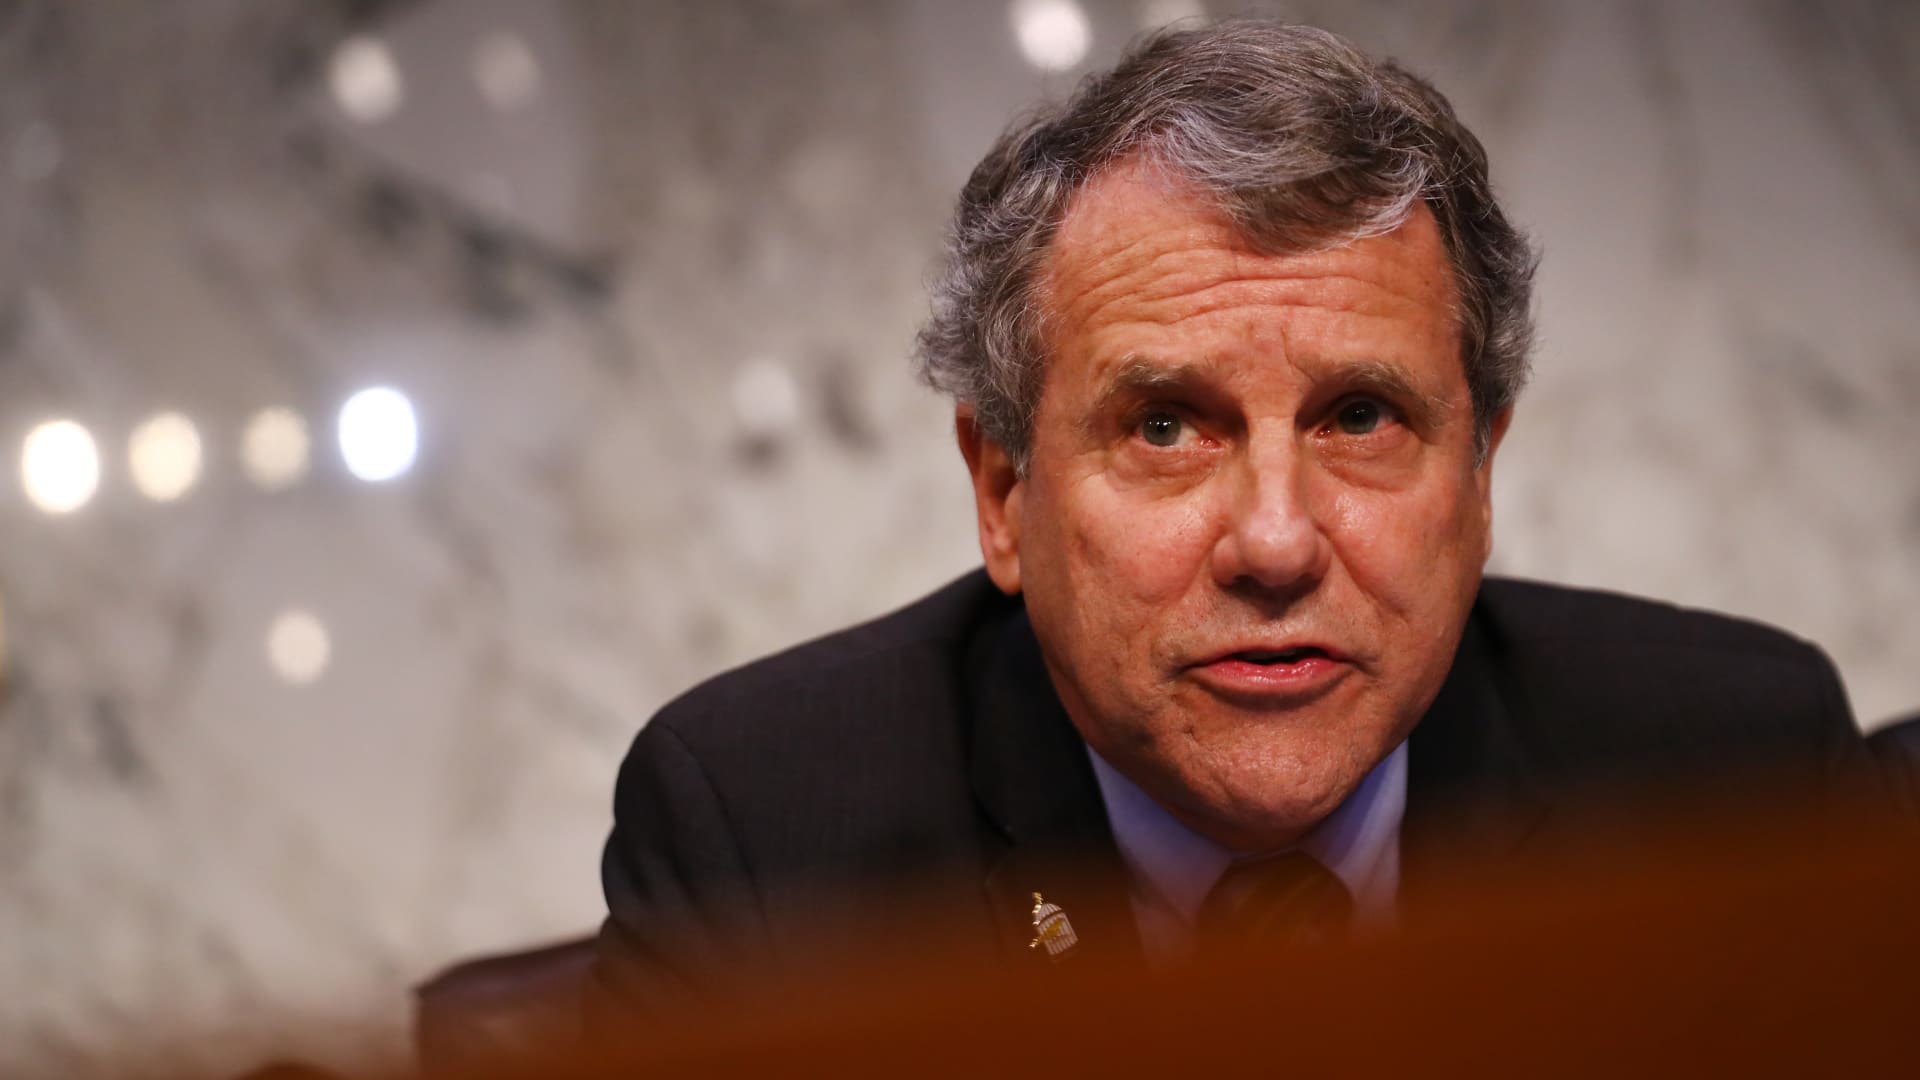 Sen. Sherrod Brown, D-Ohio, and ranking member of the Senate Banking Committee, speaks at a Washington, D.C., hearing on July 16, 2019.